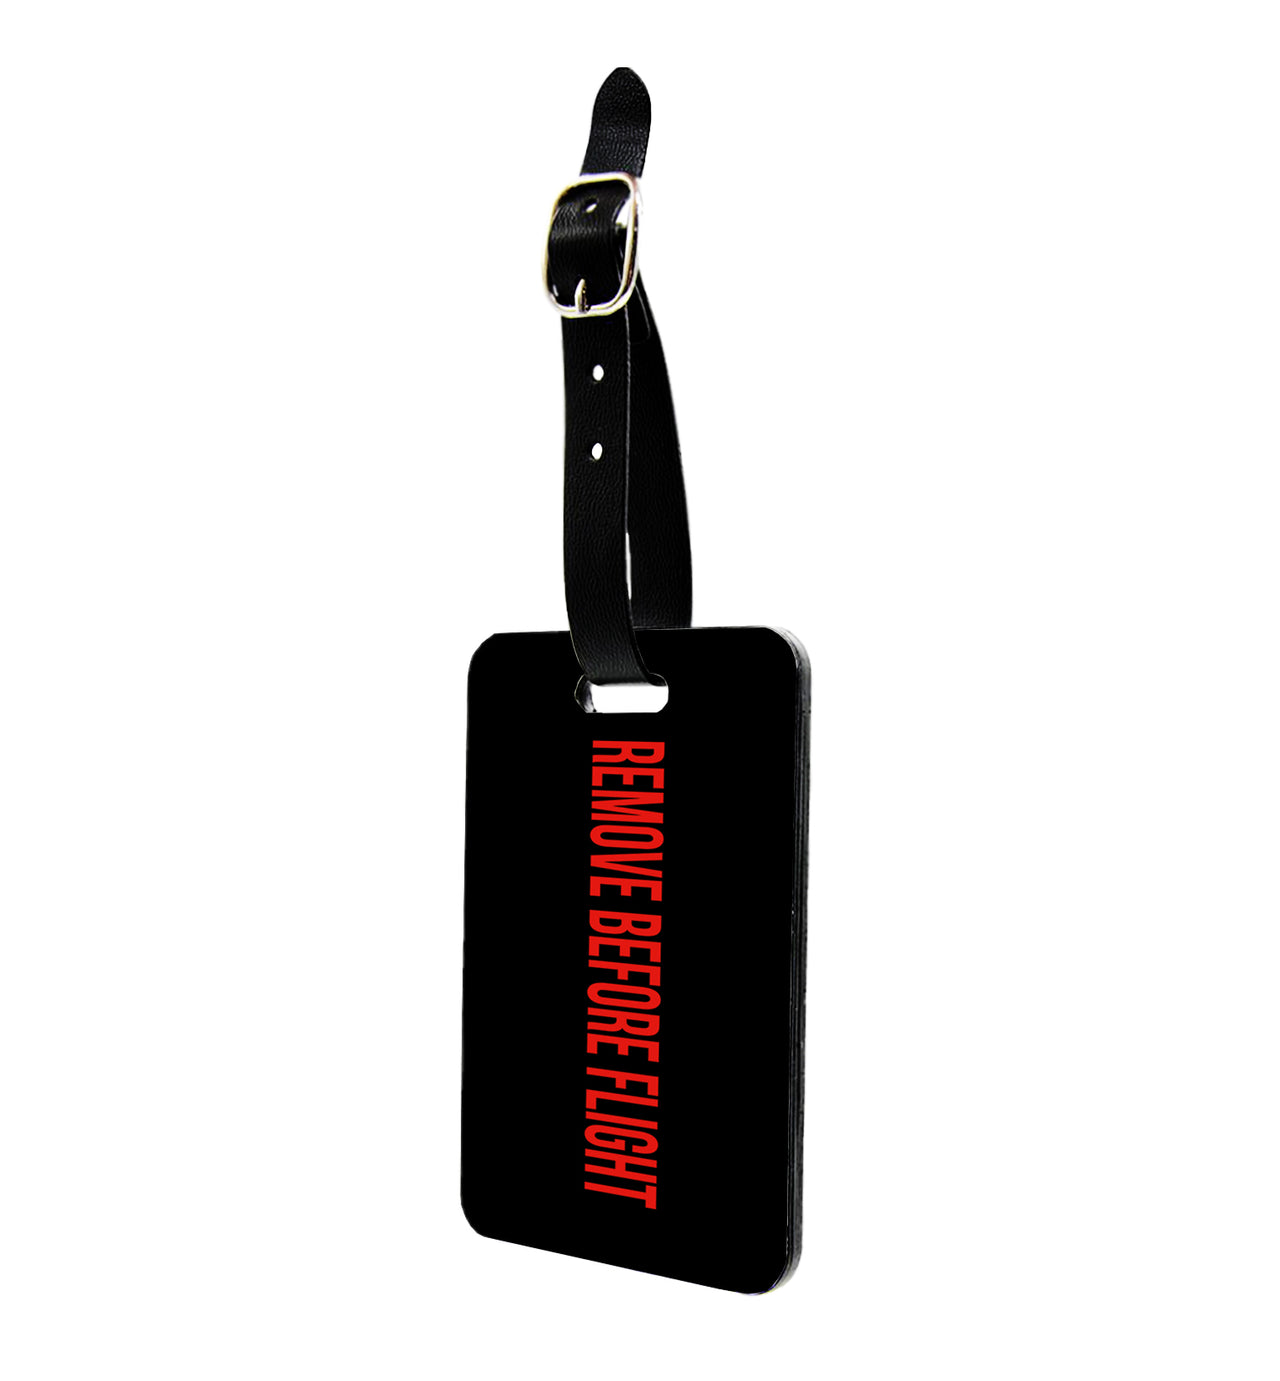 Remove Before Flight 2 Designed Luggage Tag